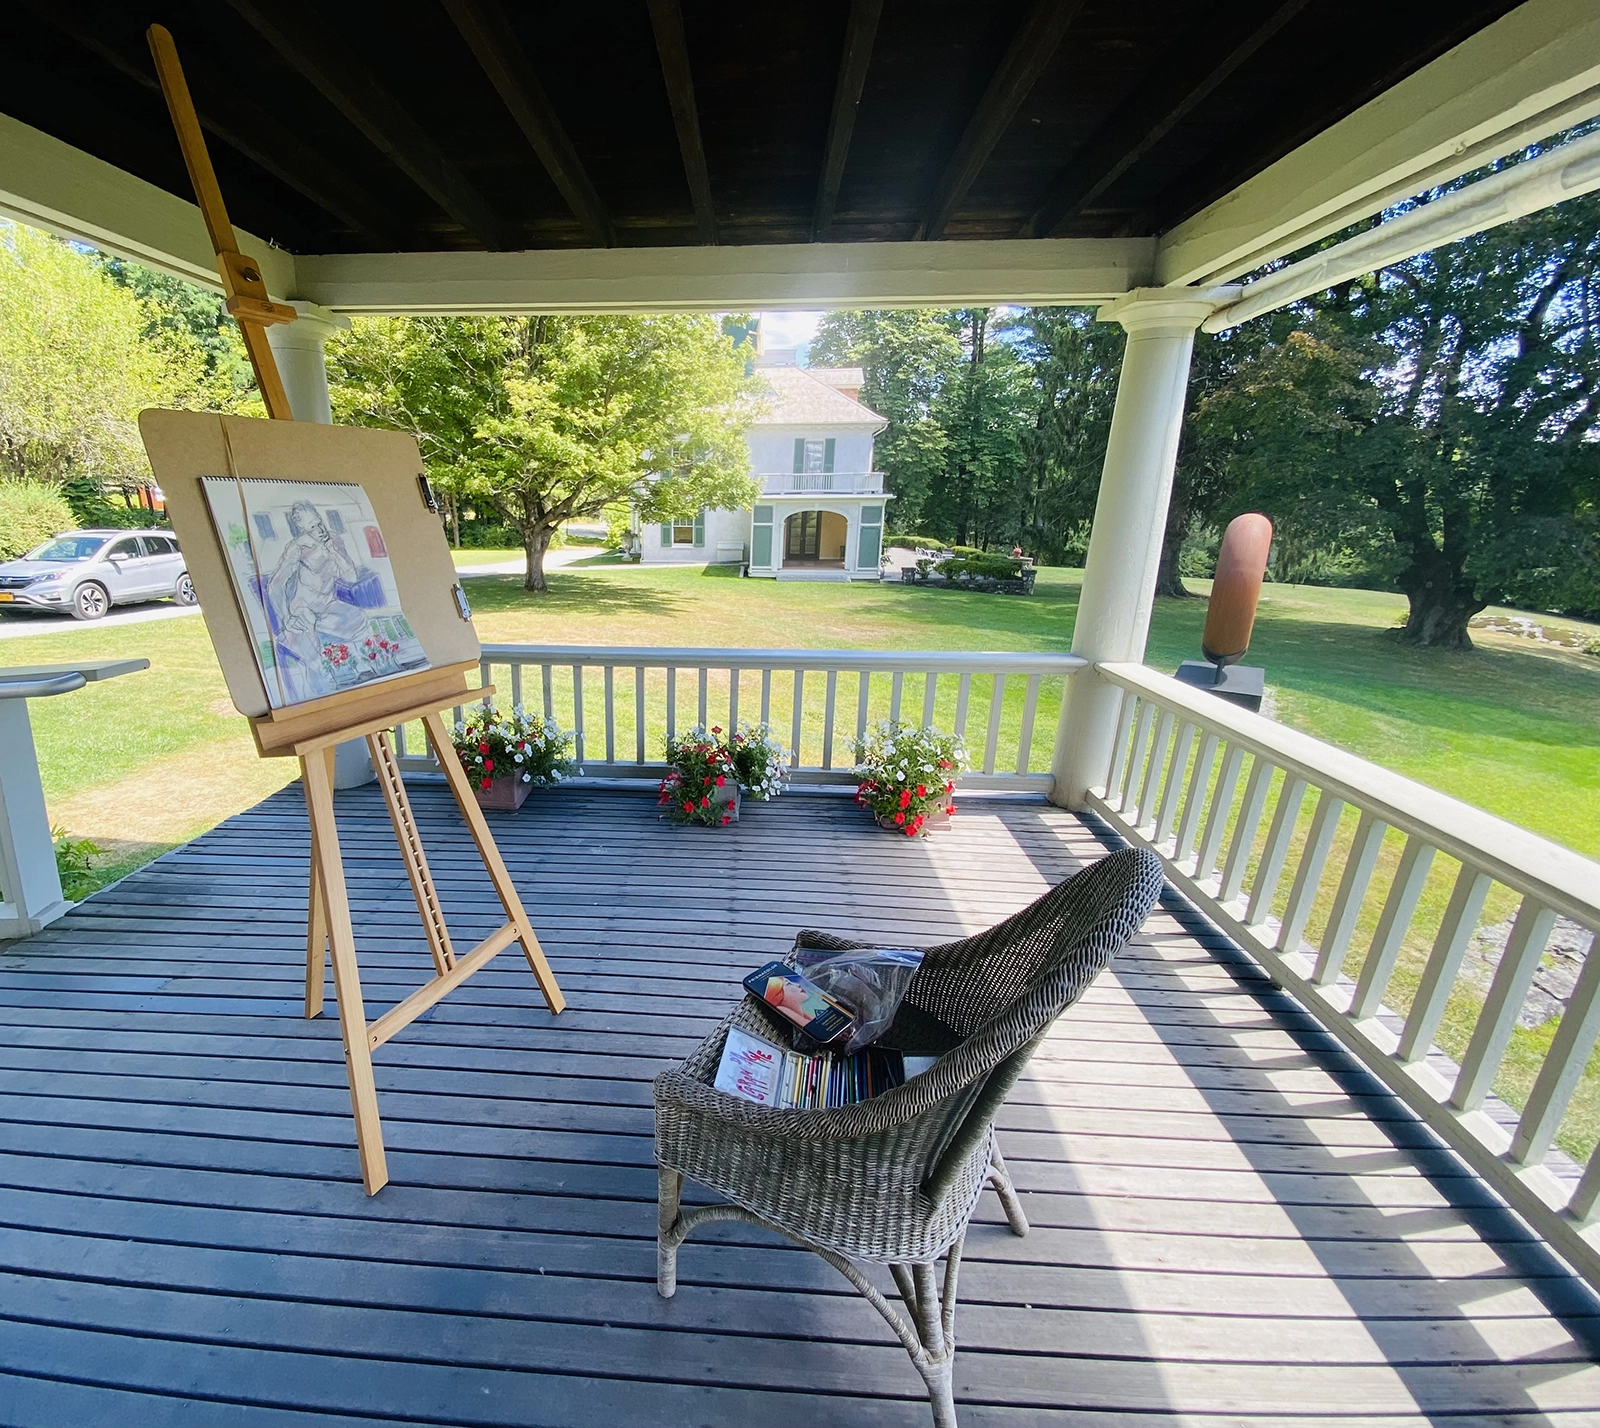 A scenic porch setup for figure drawing at Chesterwood. An easel with a drawing of a seated figure is positioned near the edge of the porch, overlooking a lush, green lawn with trees and a historic white house in the background. A wicker chair with art supplies sits nearby. Potted flowers decorate the porch railing, adding a touch of color to the serene and picturesque setting.